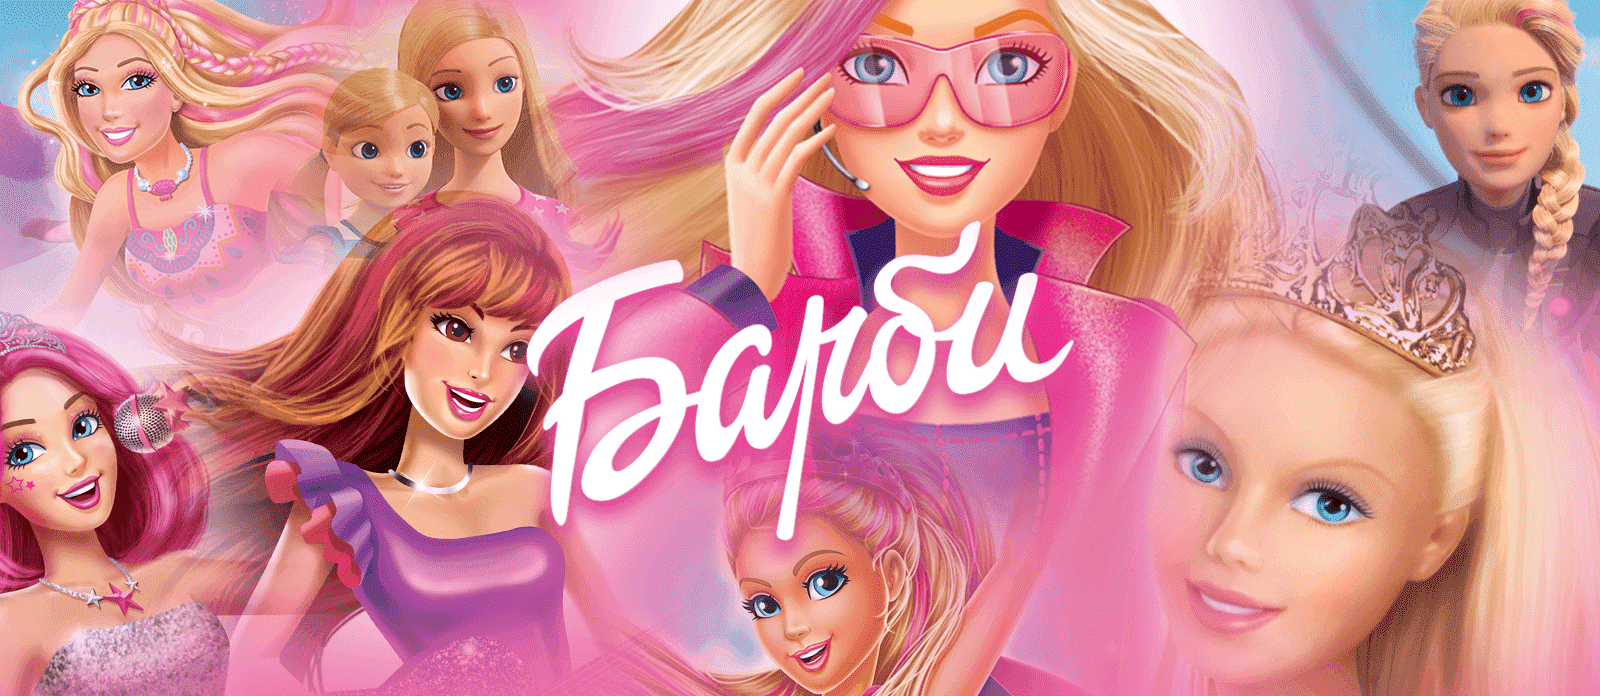 Swallows barbie What to